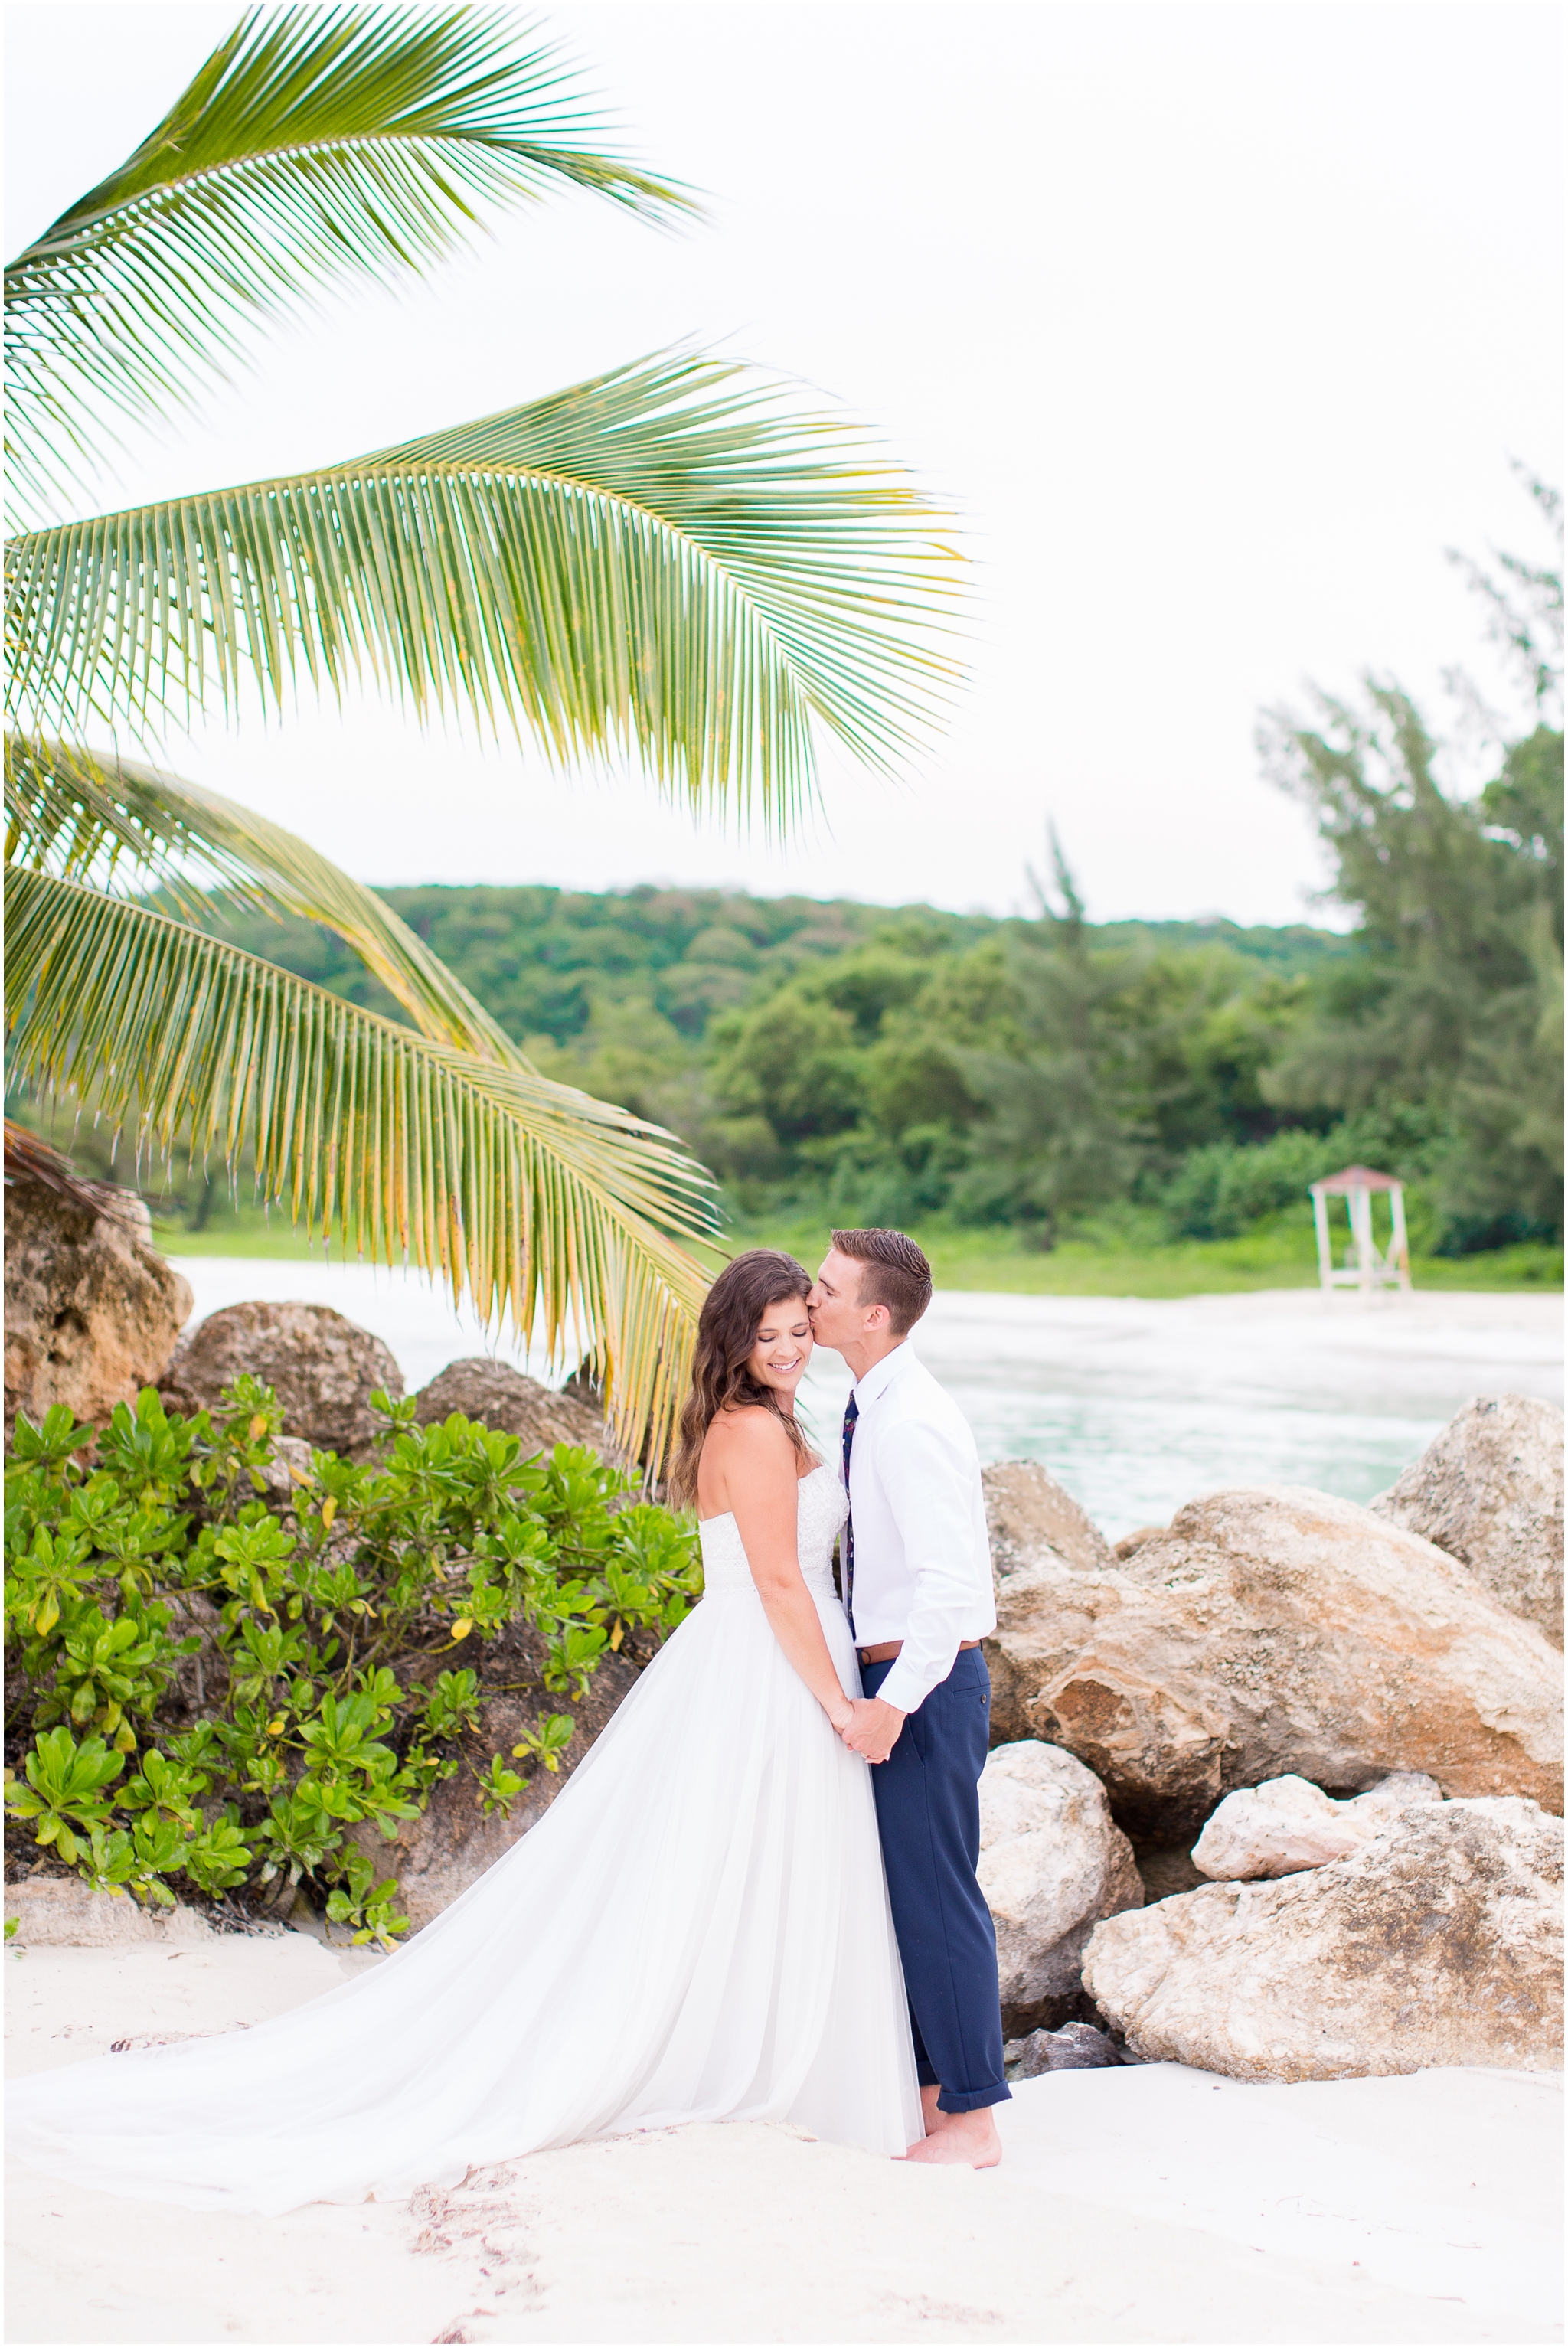 This Montego Bay wedding was a Jamaica destination wedding captured by Jamaica wedding photographer Taylor Rose Photography at one of the best Montego Bay wedding venues, the Royalton Blue Waters Montego Bay. This Royalton Blue waters wedding at the Royalton Montego Bay Jamaica included dusty purple bridesmaid dresses from Lulu’s and a beach ceremony.